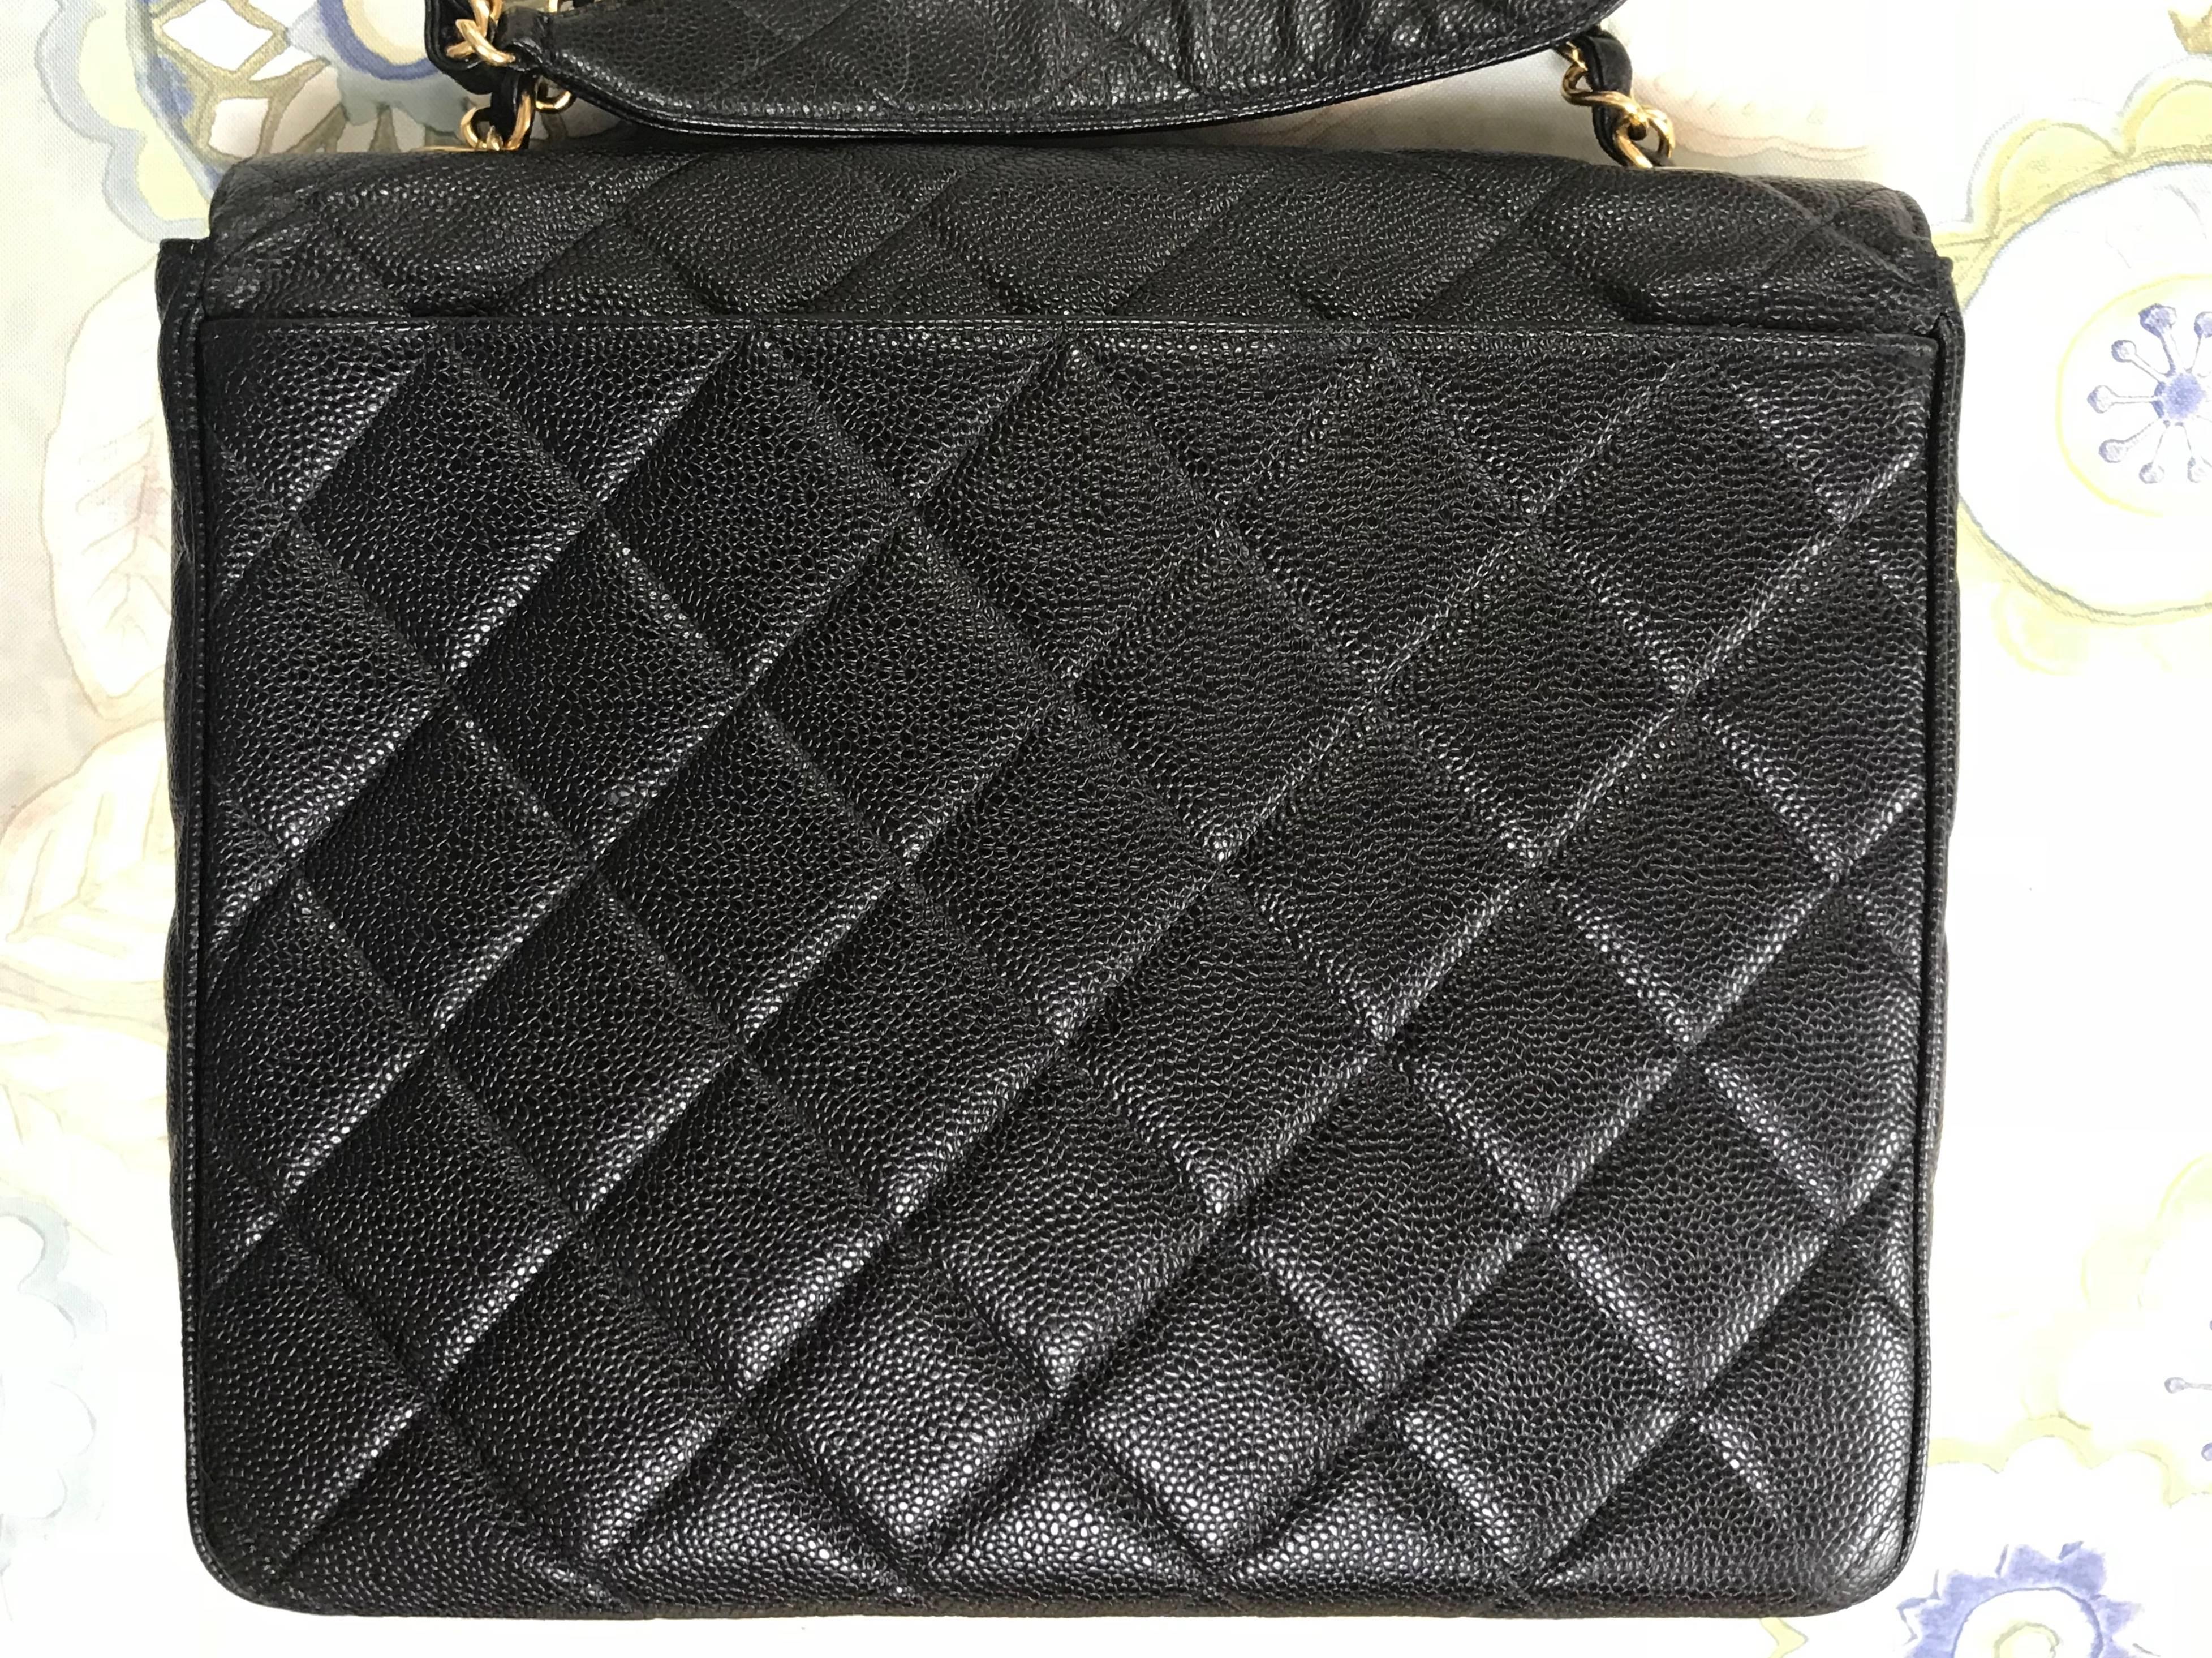 Vintage Chanel classic large black caviar leather 2.55 square chain shoulder bag In Good Condition For Sale In Kashiwa, Chiba